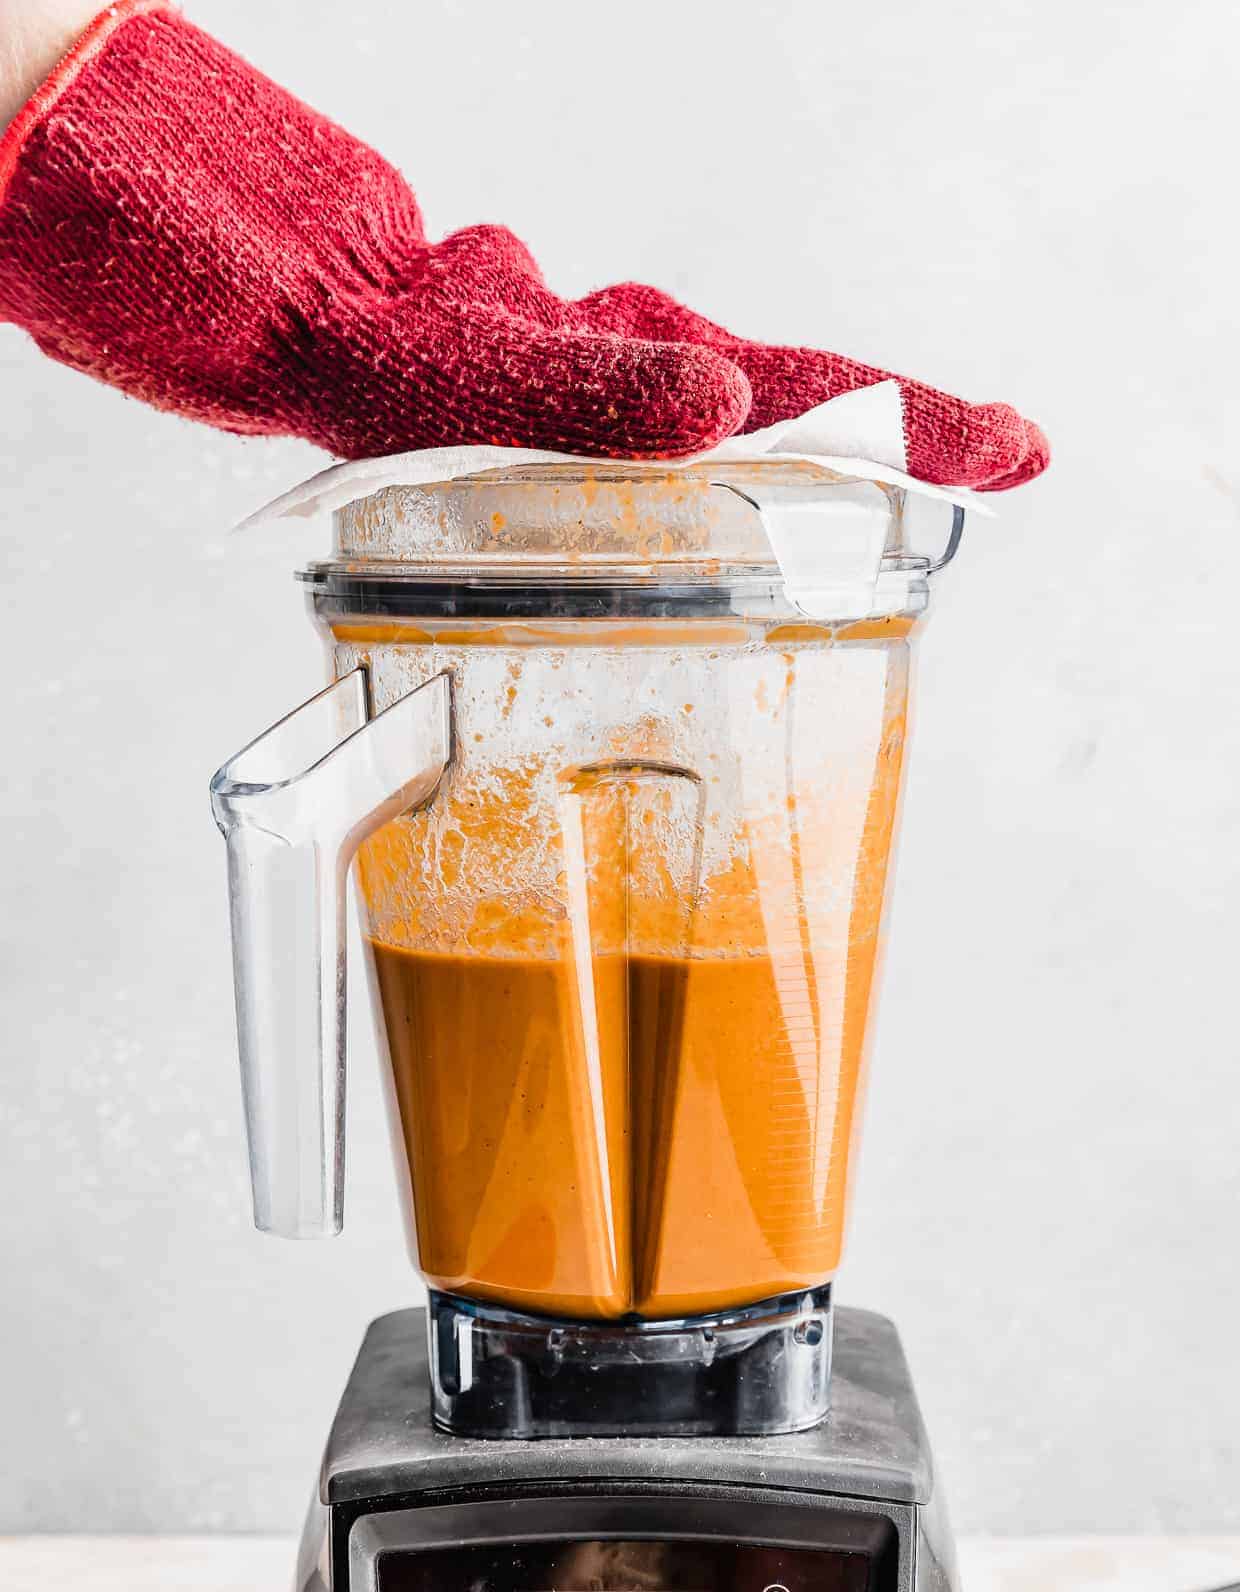 A blender with tomato basil soup in it, with a hot pad covered hand over the blender opening hole.